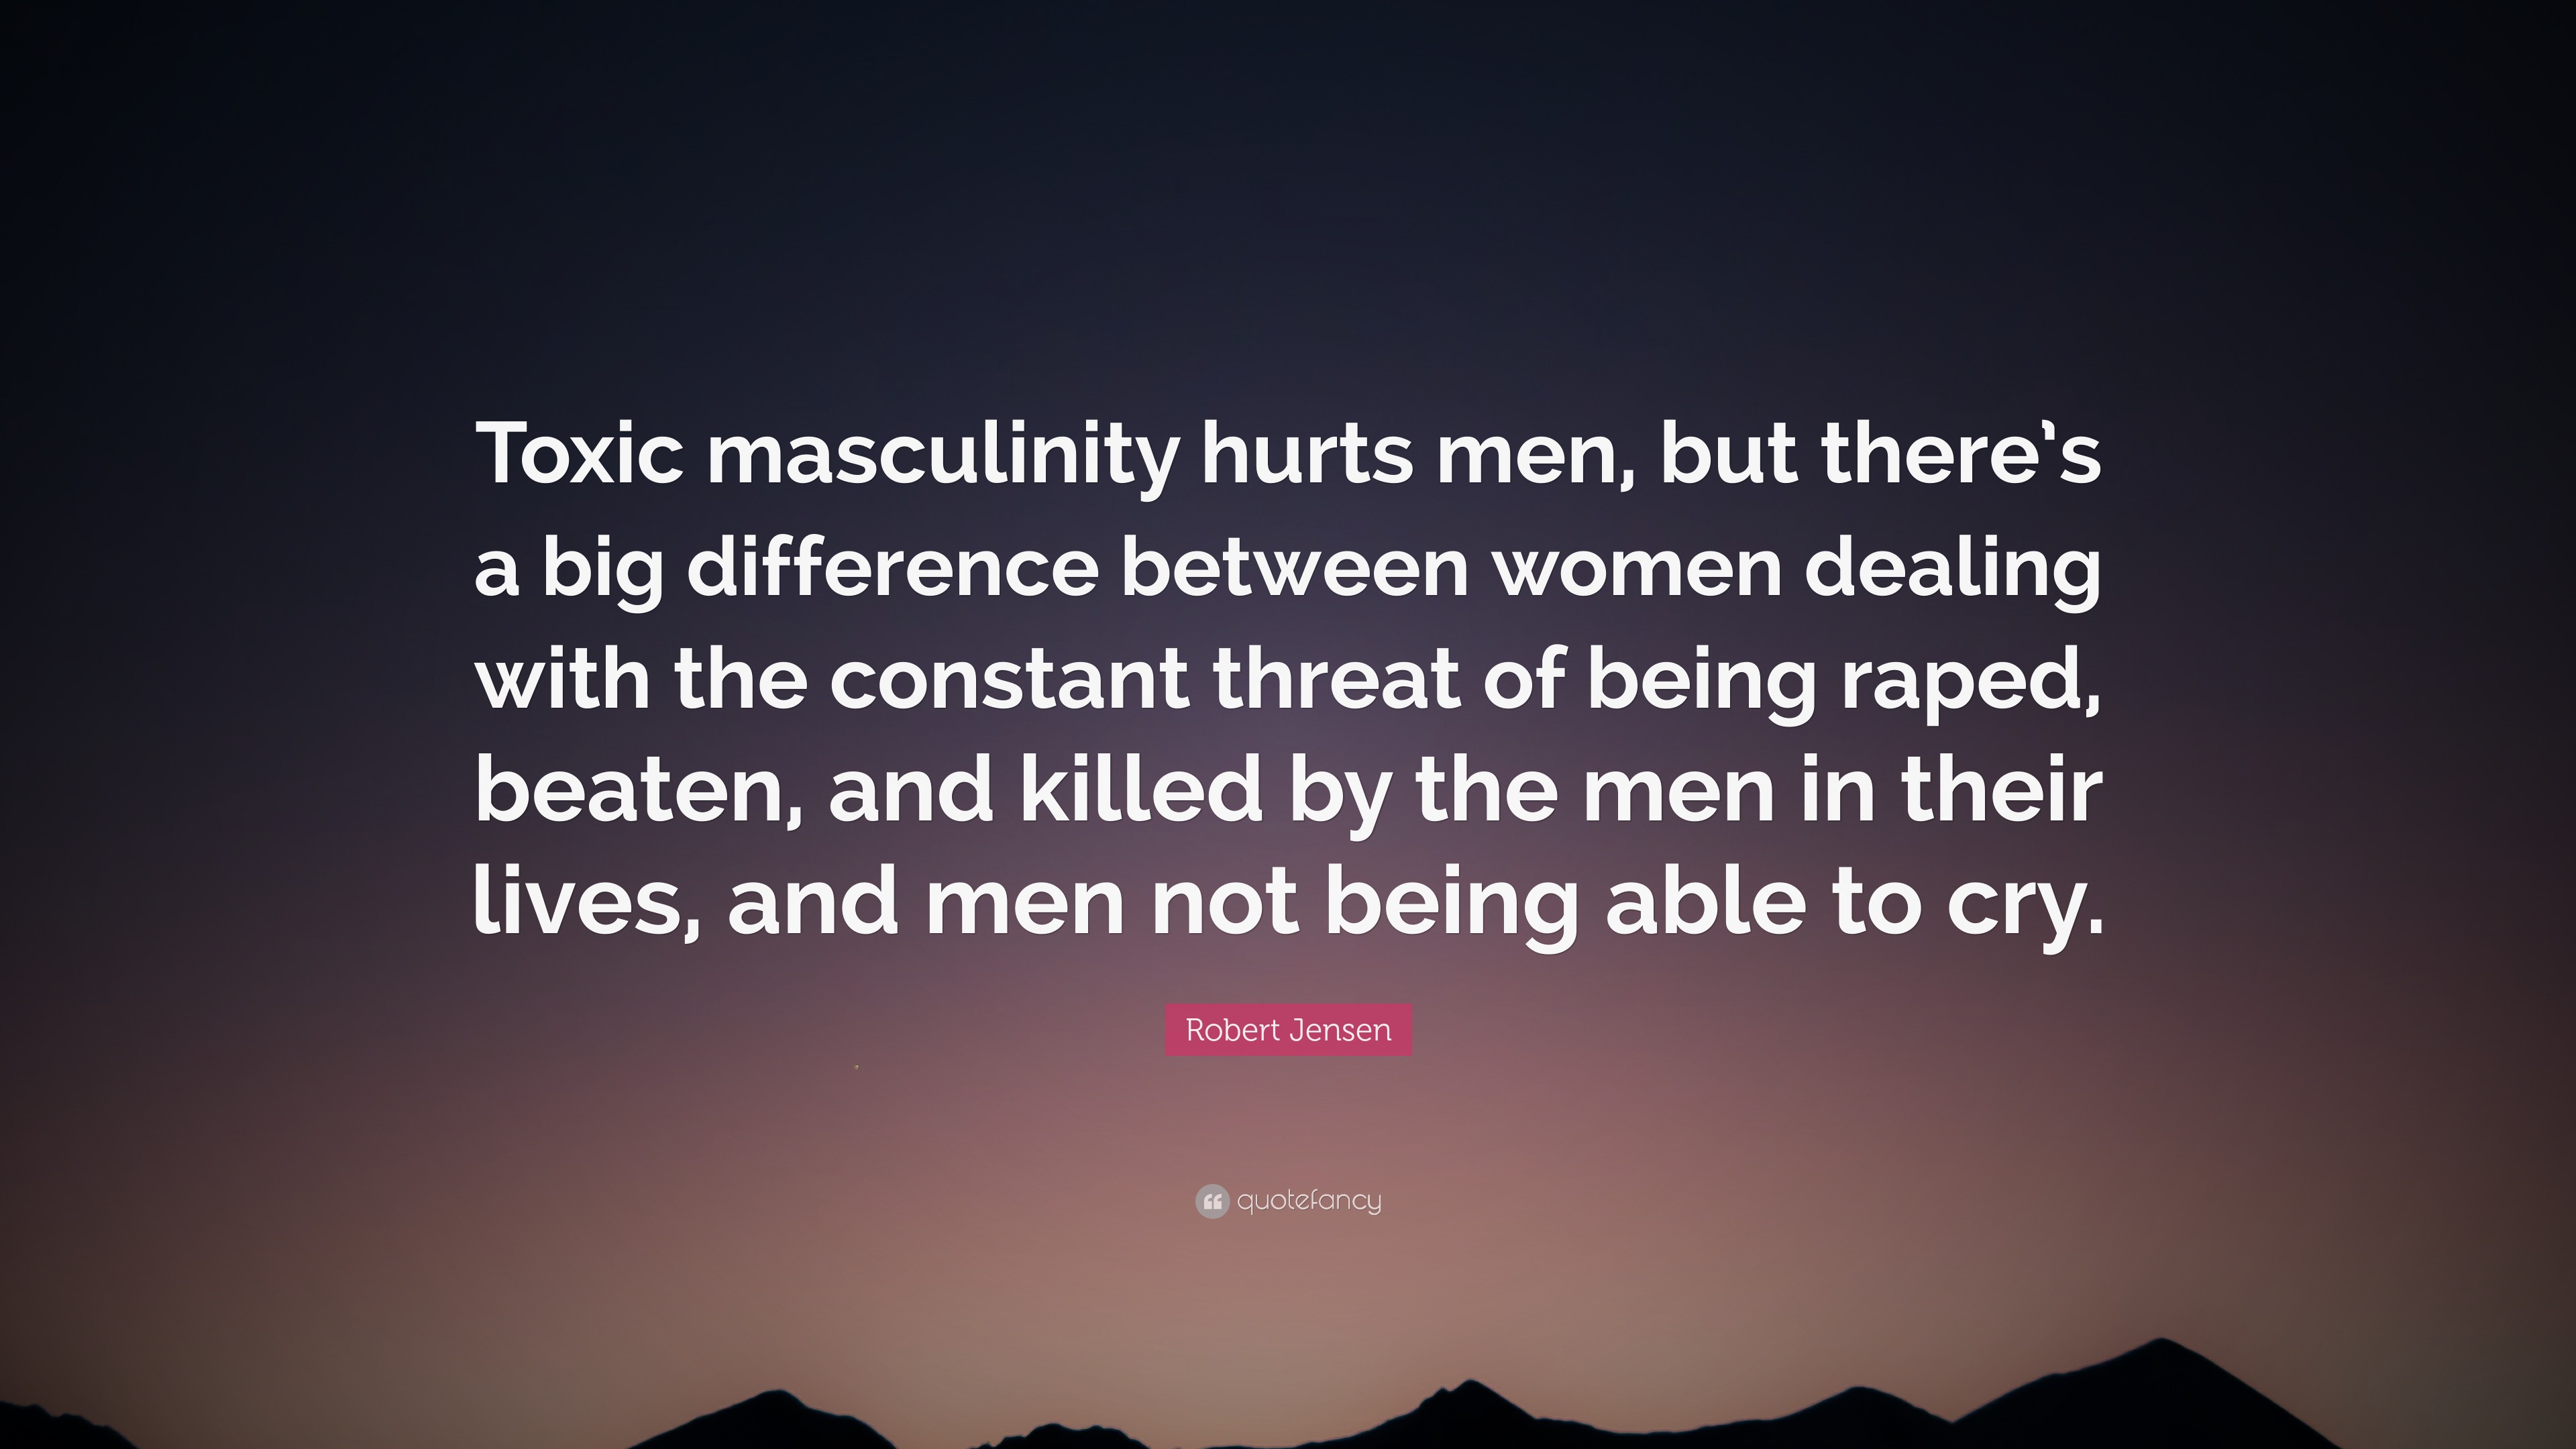 argumentative essay about toxic masculinity